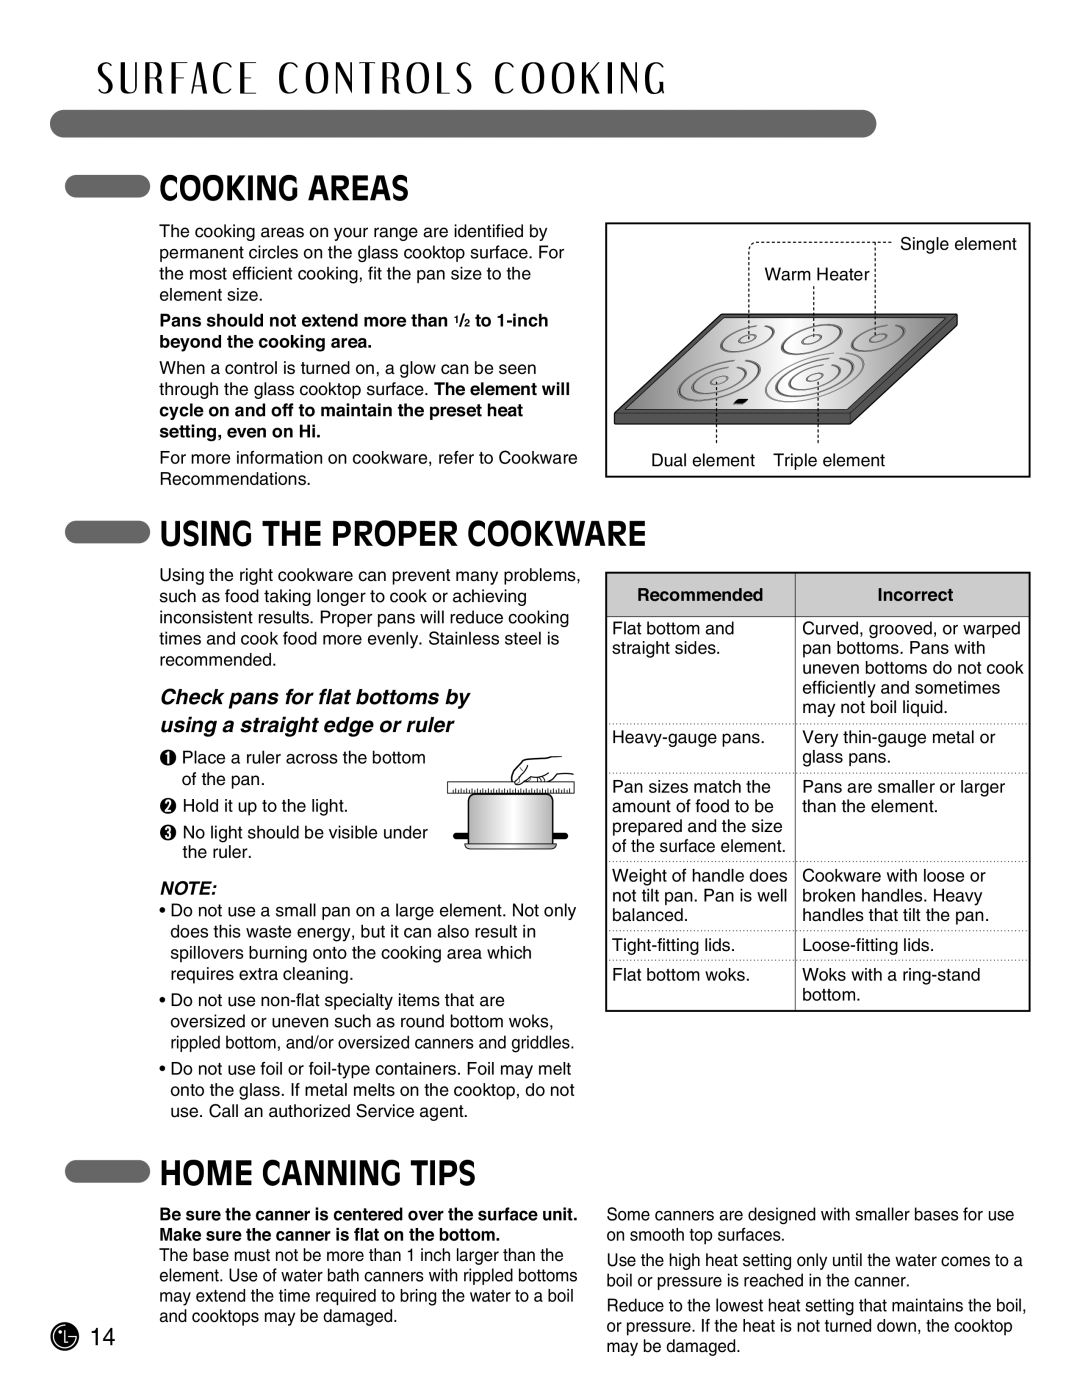 LG Electronics LSE3092ST manual Cooking Areas, Using The Proper Cookware, Home Canning Tips 